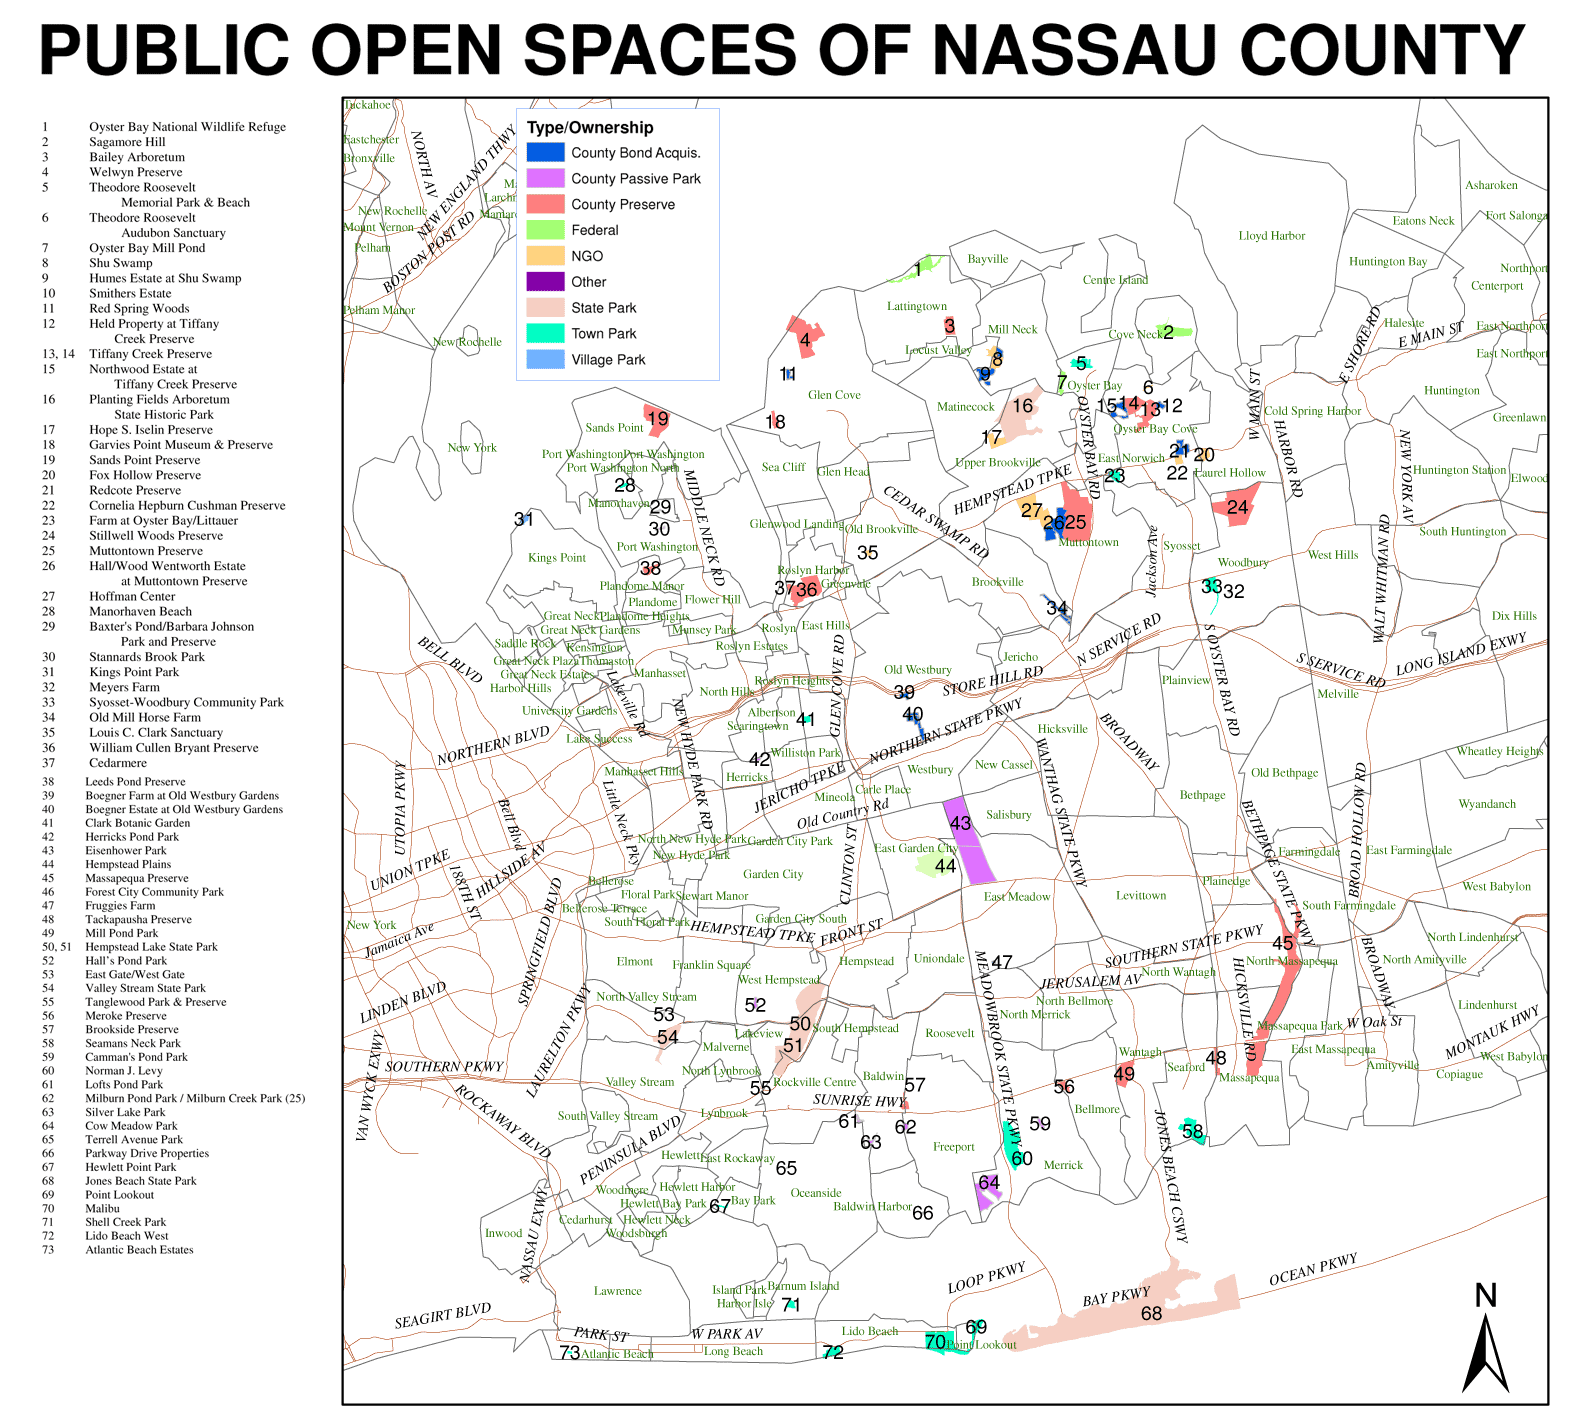 Nassau County Open Spaces Map - gif version